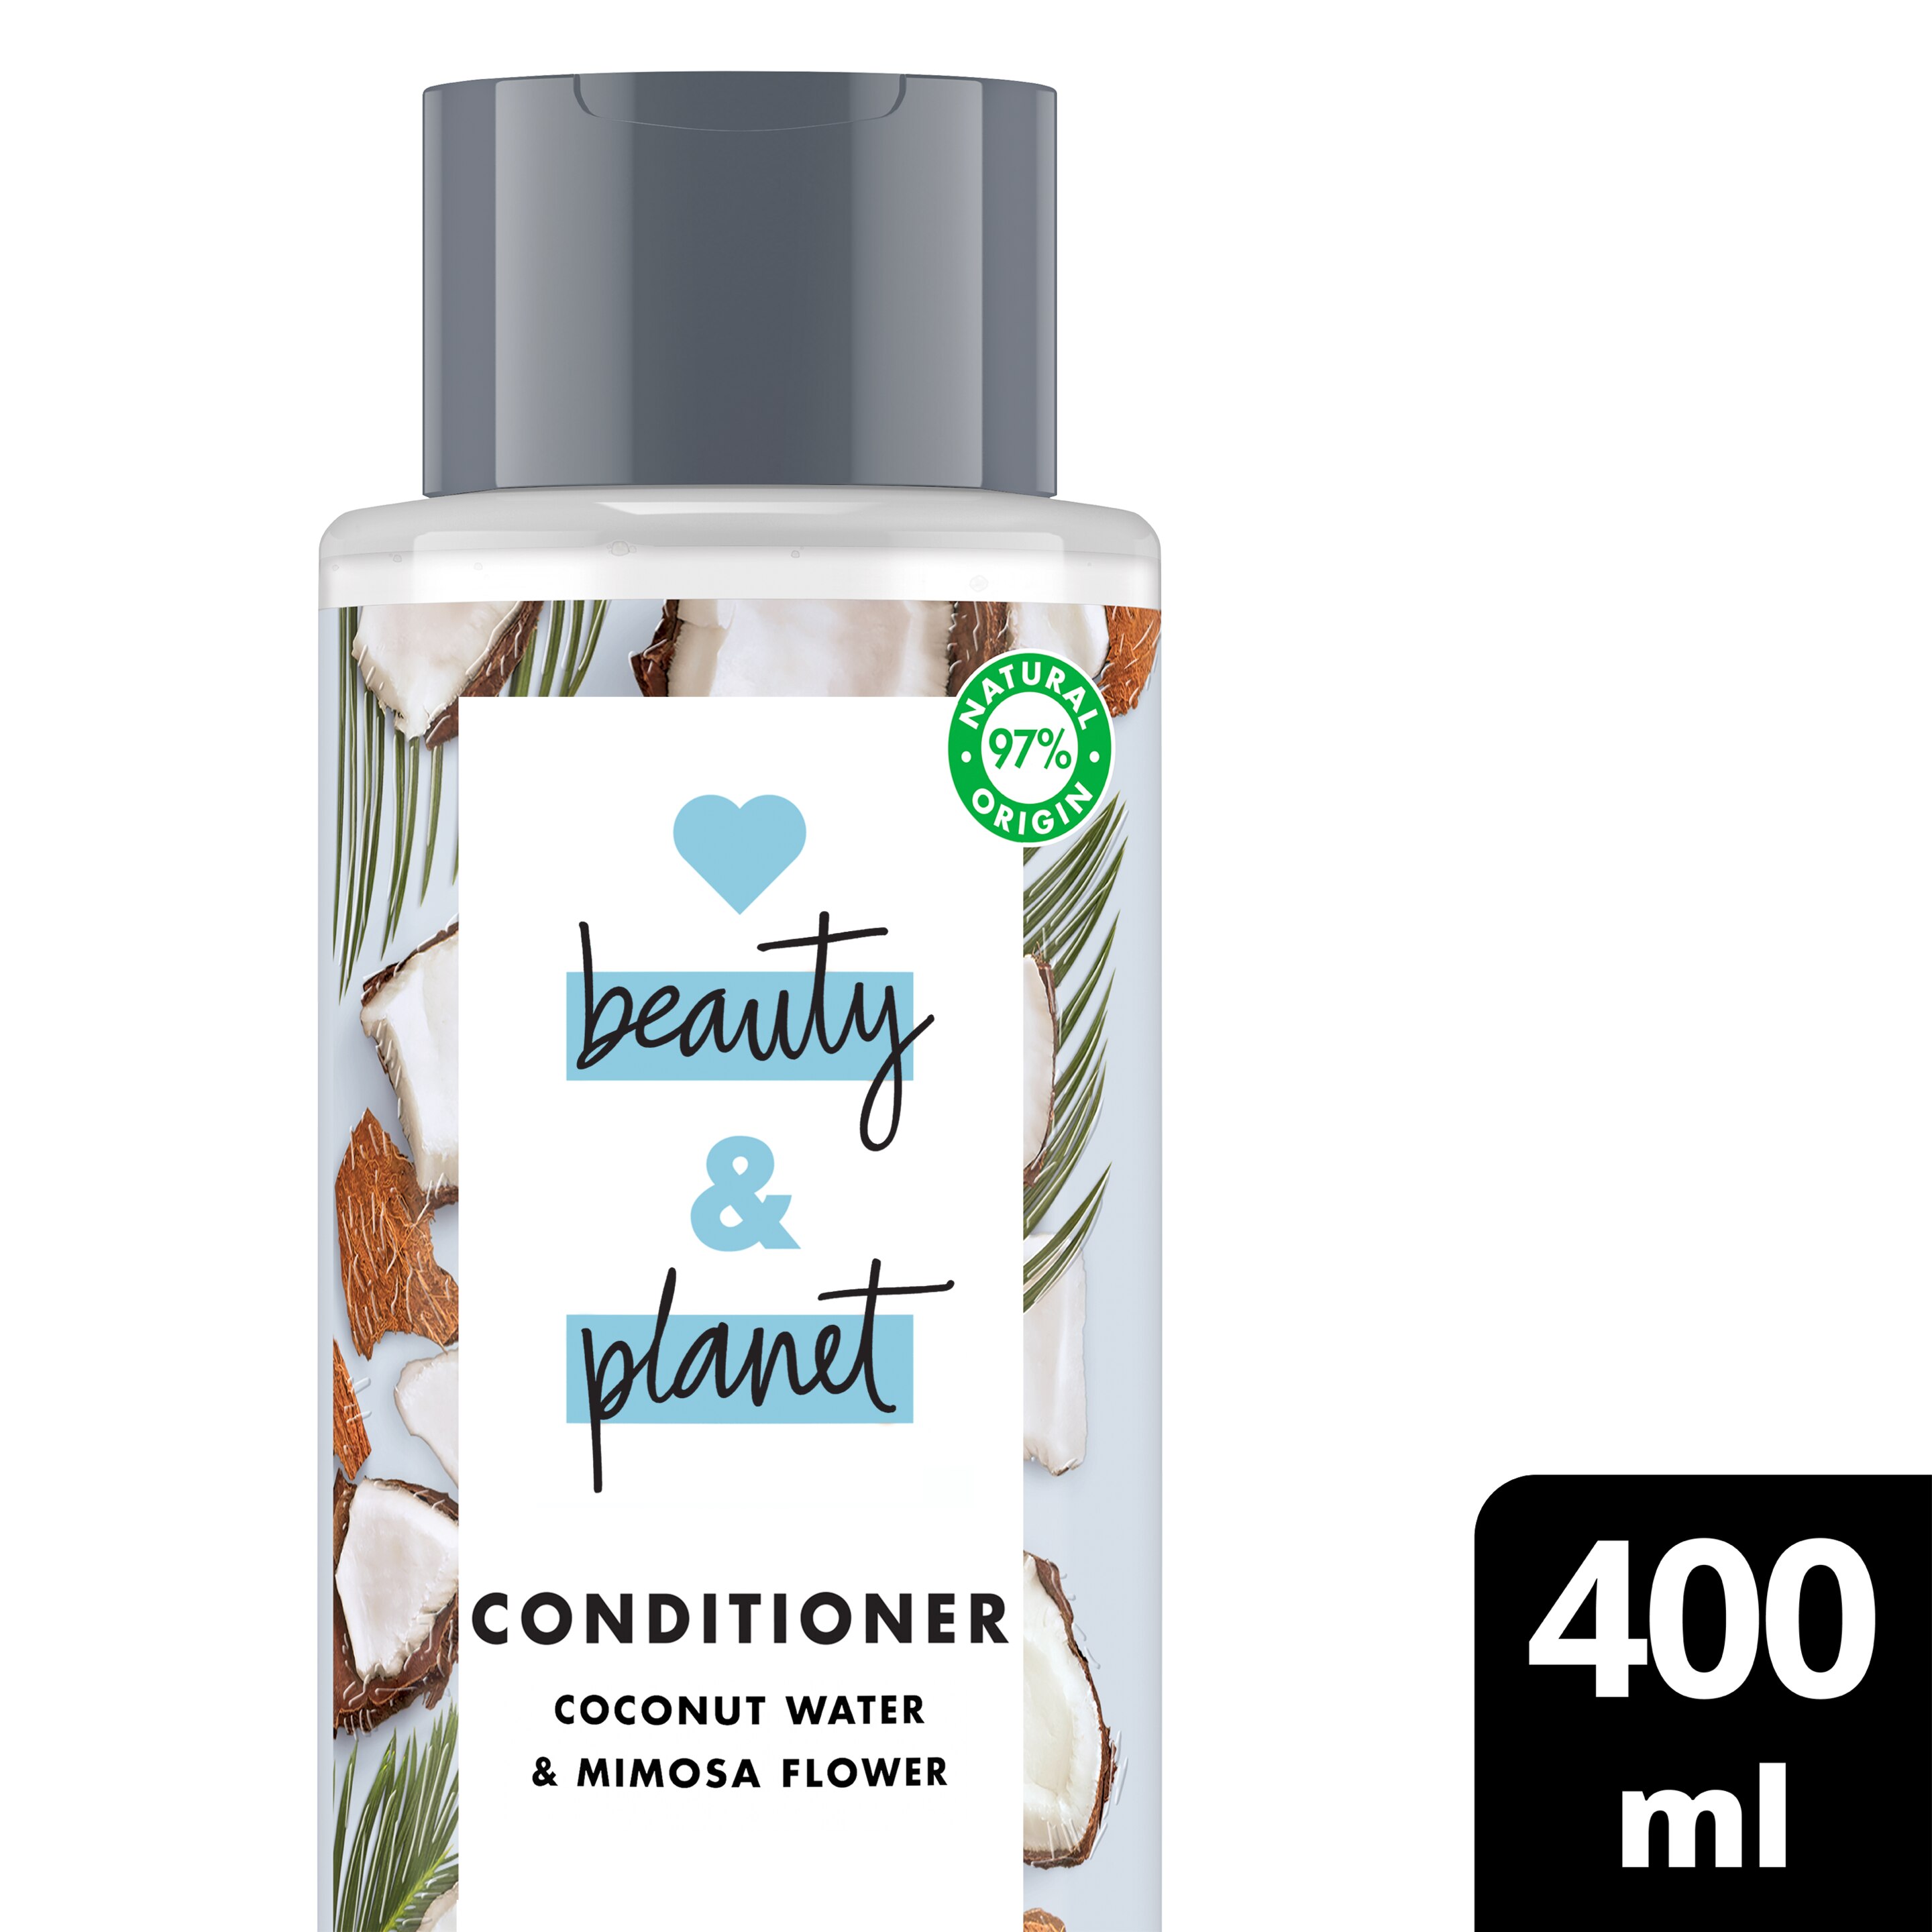 coconut water & mimosa flower conditioner